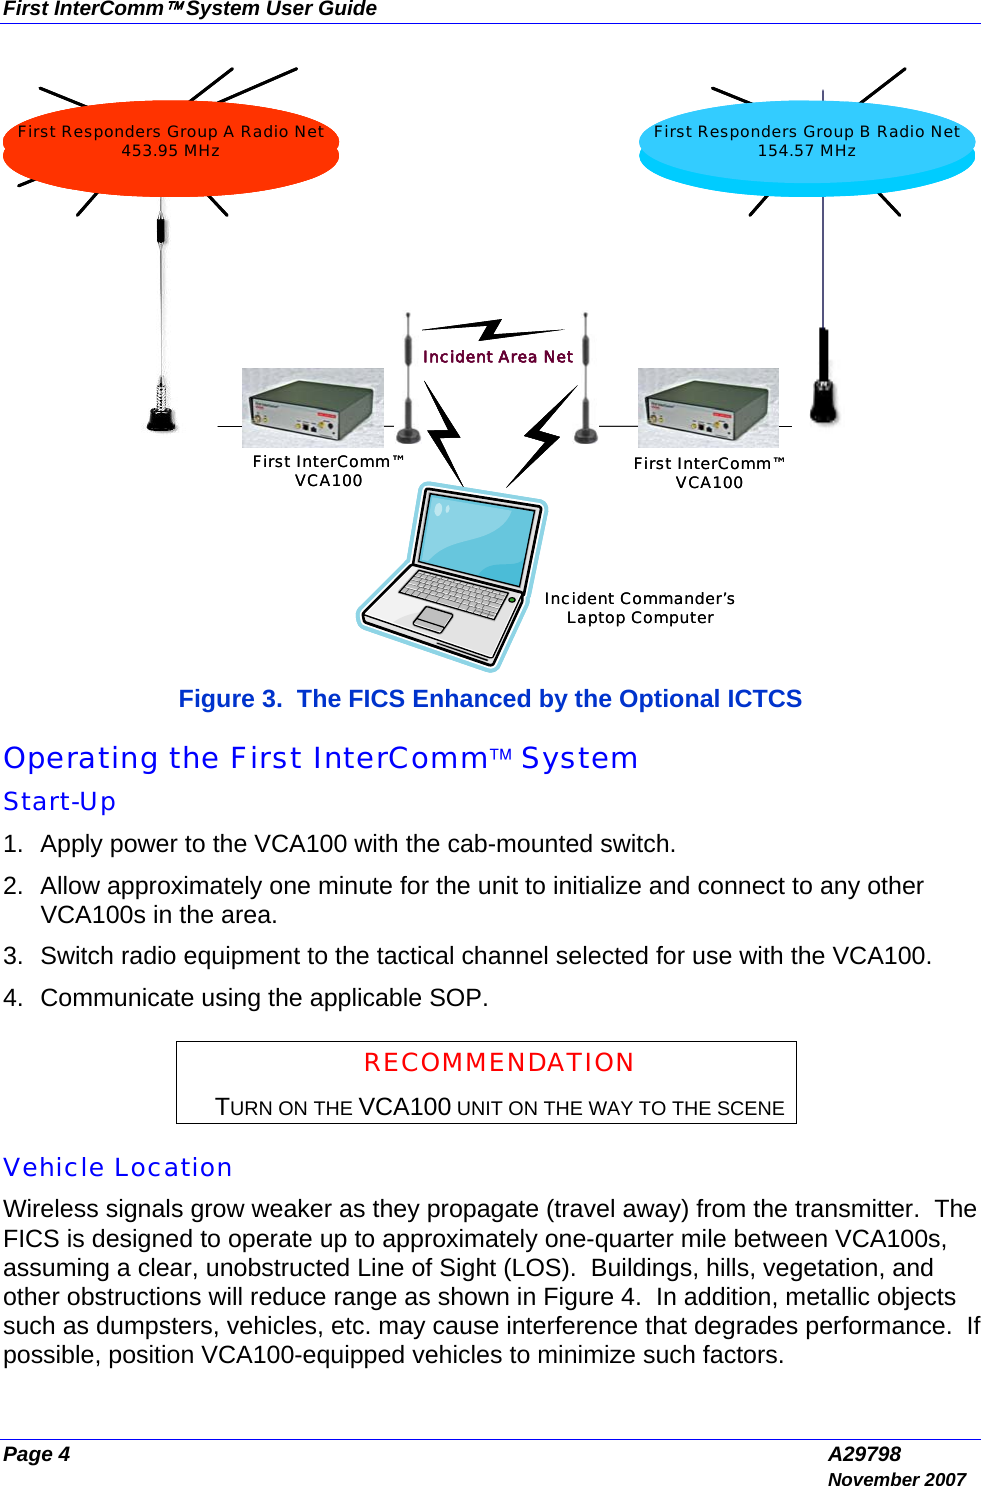 First InterComm™ System User Guide Page 4  A29798  November 2007 First InterComm™VCA100First Responders Group A Radio Net453.95 MHzFirst InterComm™VCA100Incident Area NetIncident Commander’sLaptop ComputerFirst Responders Group B Radio Net154.57 MHzFirst InterComm™VCA100First Responders Group A Radio Net453.95 MHzFirst Responders Group A Radio Net453.95 MHzFirst InterComm™VCA100Incident Area NetIncident Commander’sLaptop ComputerFirst Responders Group B Radio Net154.57 MHz Figure 3.  The FICS Enhanced by the Optional ICTCS  Operating the First InterComm™ System Start-Up 1.  Apply power to the VCA100 with the cab-mounted switch. 2.  Allow approximately one minute for the unit to initialize and connect to any other VCA100s in the area.  3.  Switch radio equipment to the tactical channel selected for use with the VCA100. 4.  Communicate using the applicable SOP.  RECOMMENDATION TURN ON THE VCA100 UNIT ON THE WAY TO THE SCENE  Vehicle Location Wireless signals grow weaker as they propagate (travel away) from the transmitter.  The FICS is designed to operate up to approximately one-quarter mile between VCA100s, assuming a clear, unobstructed Line of Sight (LOS).  Buildings, hills, vegetation, and other obstructions will reduce range as shown in Figure 4.  In addition, metallic objects such as dumpsters, vehicles, etc. may cause interference that degrades performance.  If possible, position VCA100-equipped vehicles to minimize such factors. 